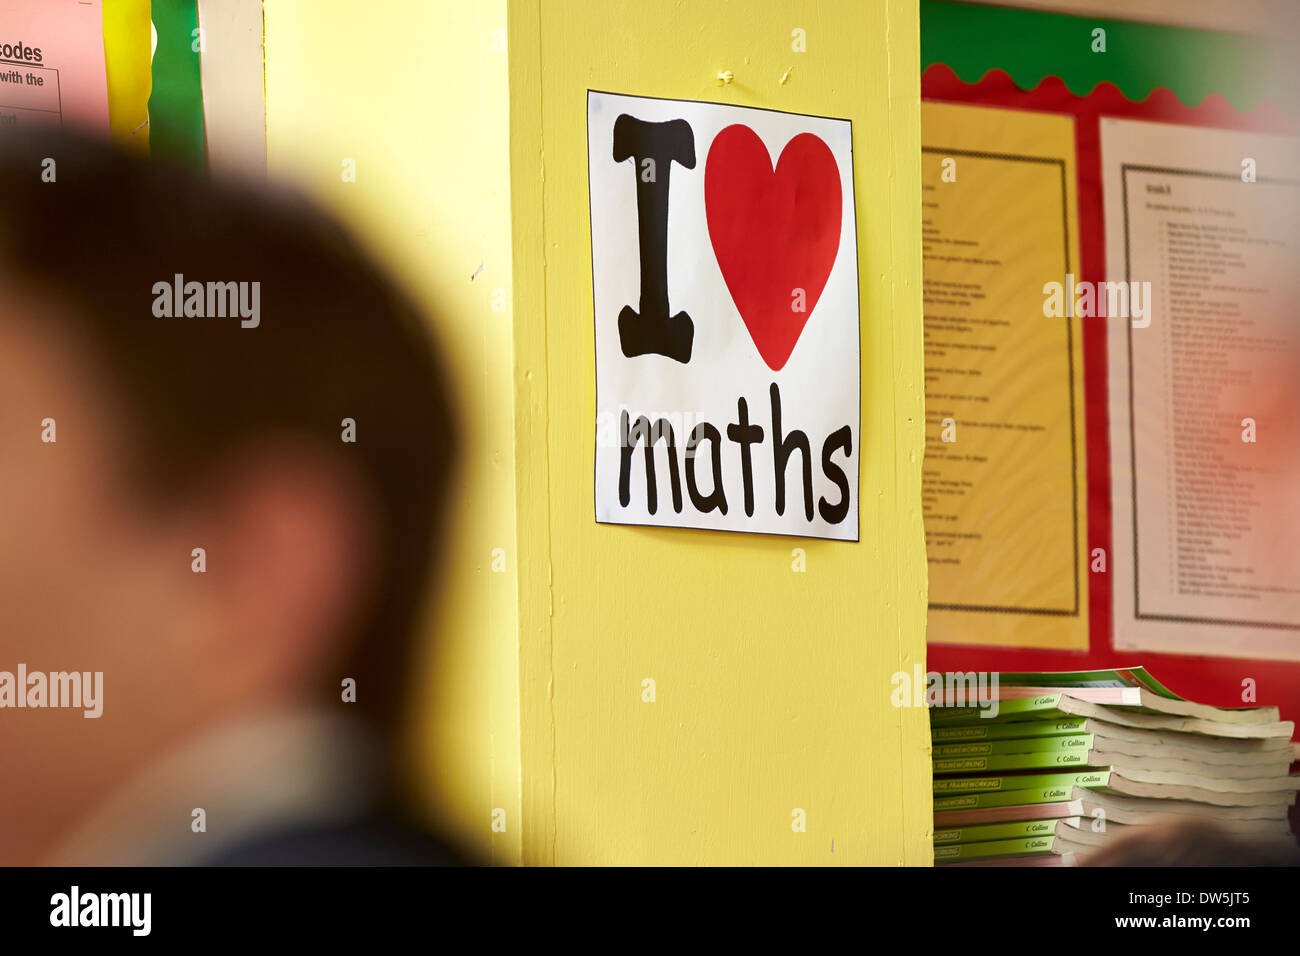 I love maths poster in a school classroom Stock Photo